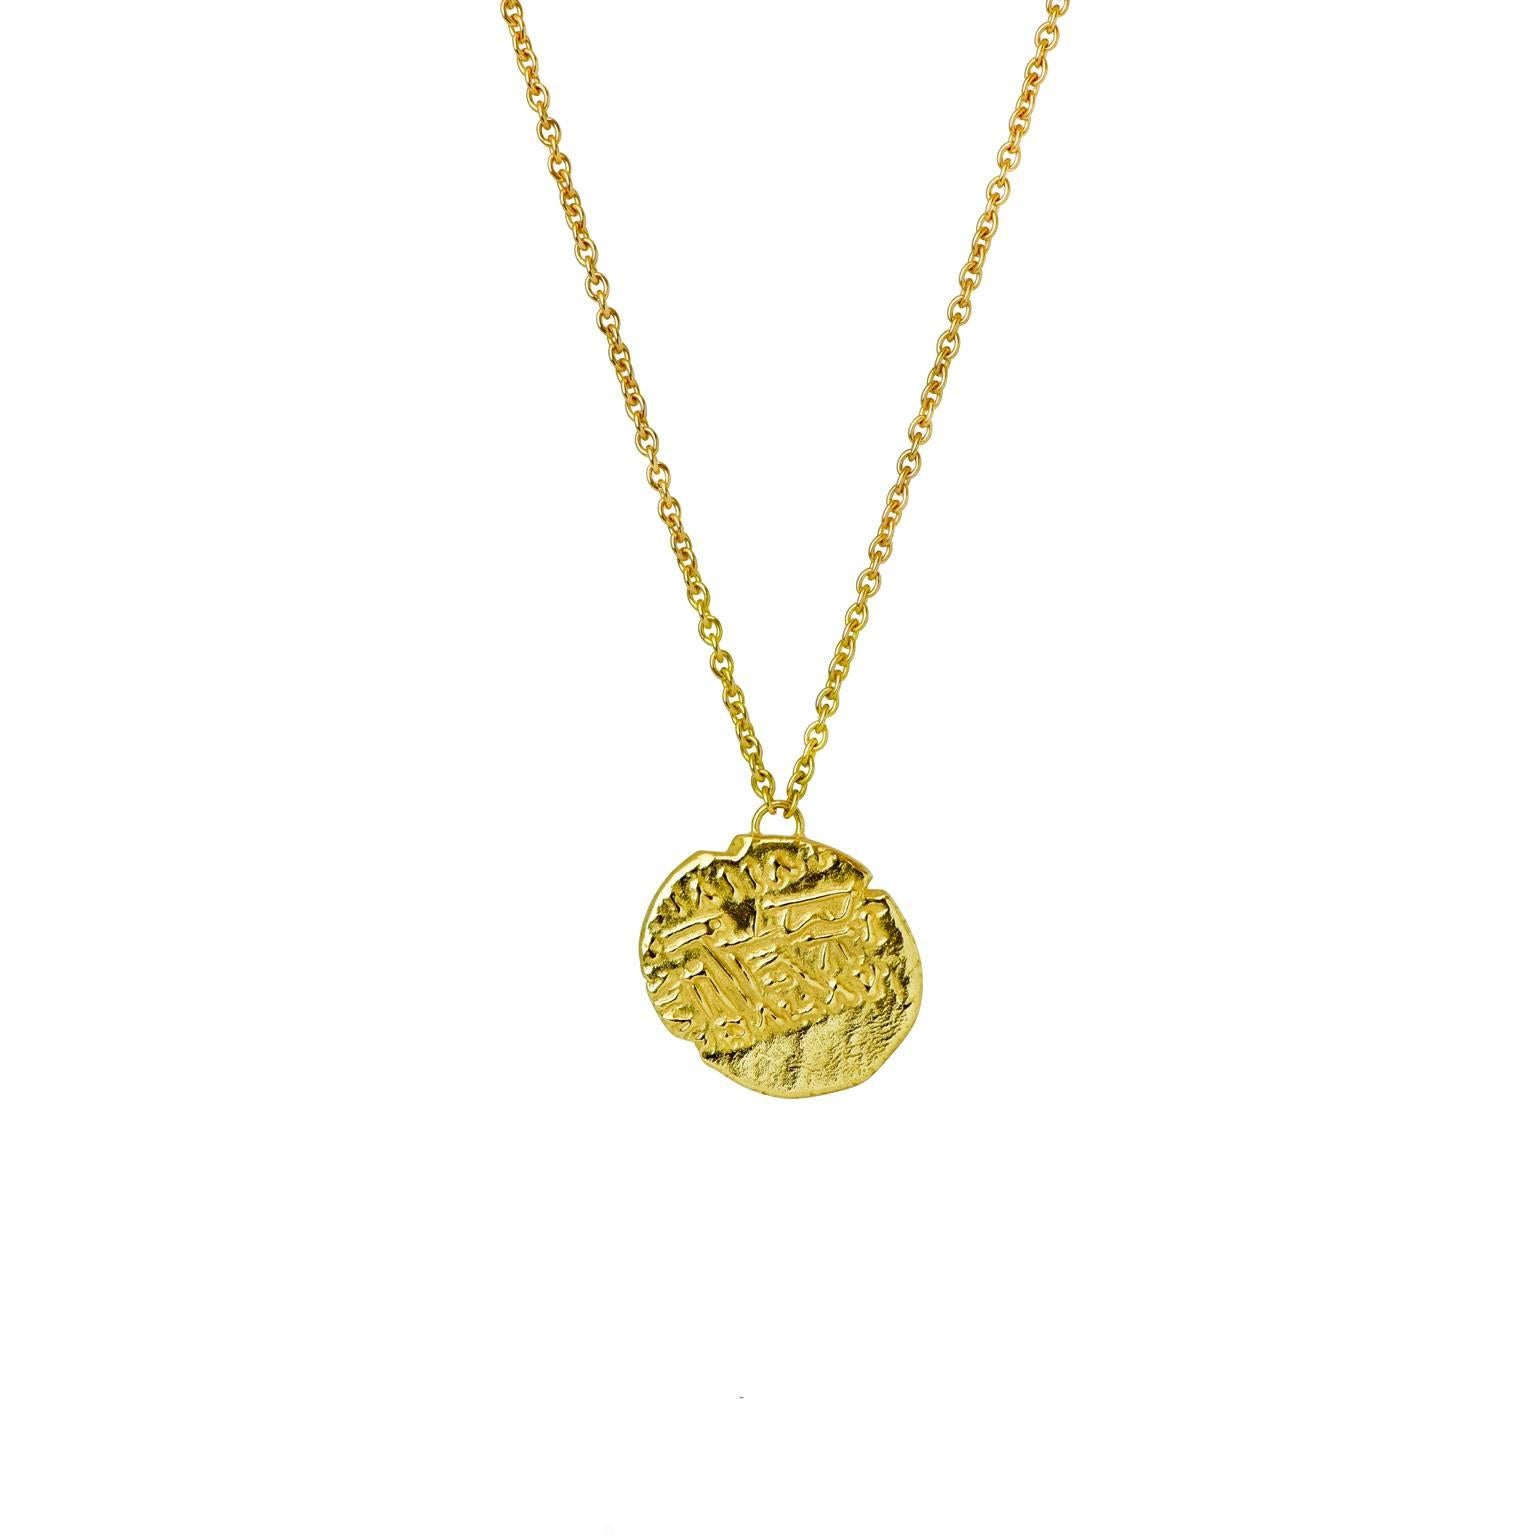 Depicting one of the many Kings of this ancient Iranian empire, the Parthian coin pendant hangs on a fine trace chain. The reverse side features an archer seated right on a throne, holding a bow. Worth its weight in gold, wear this eye catching